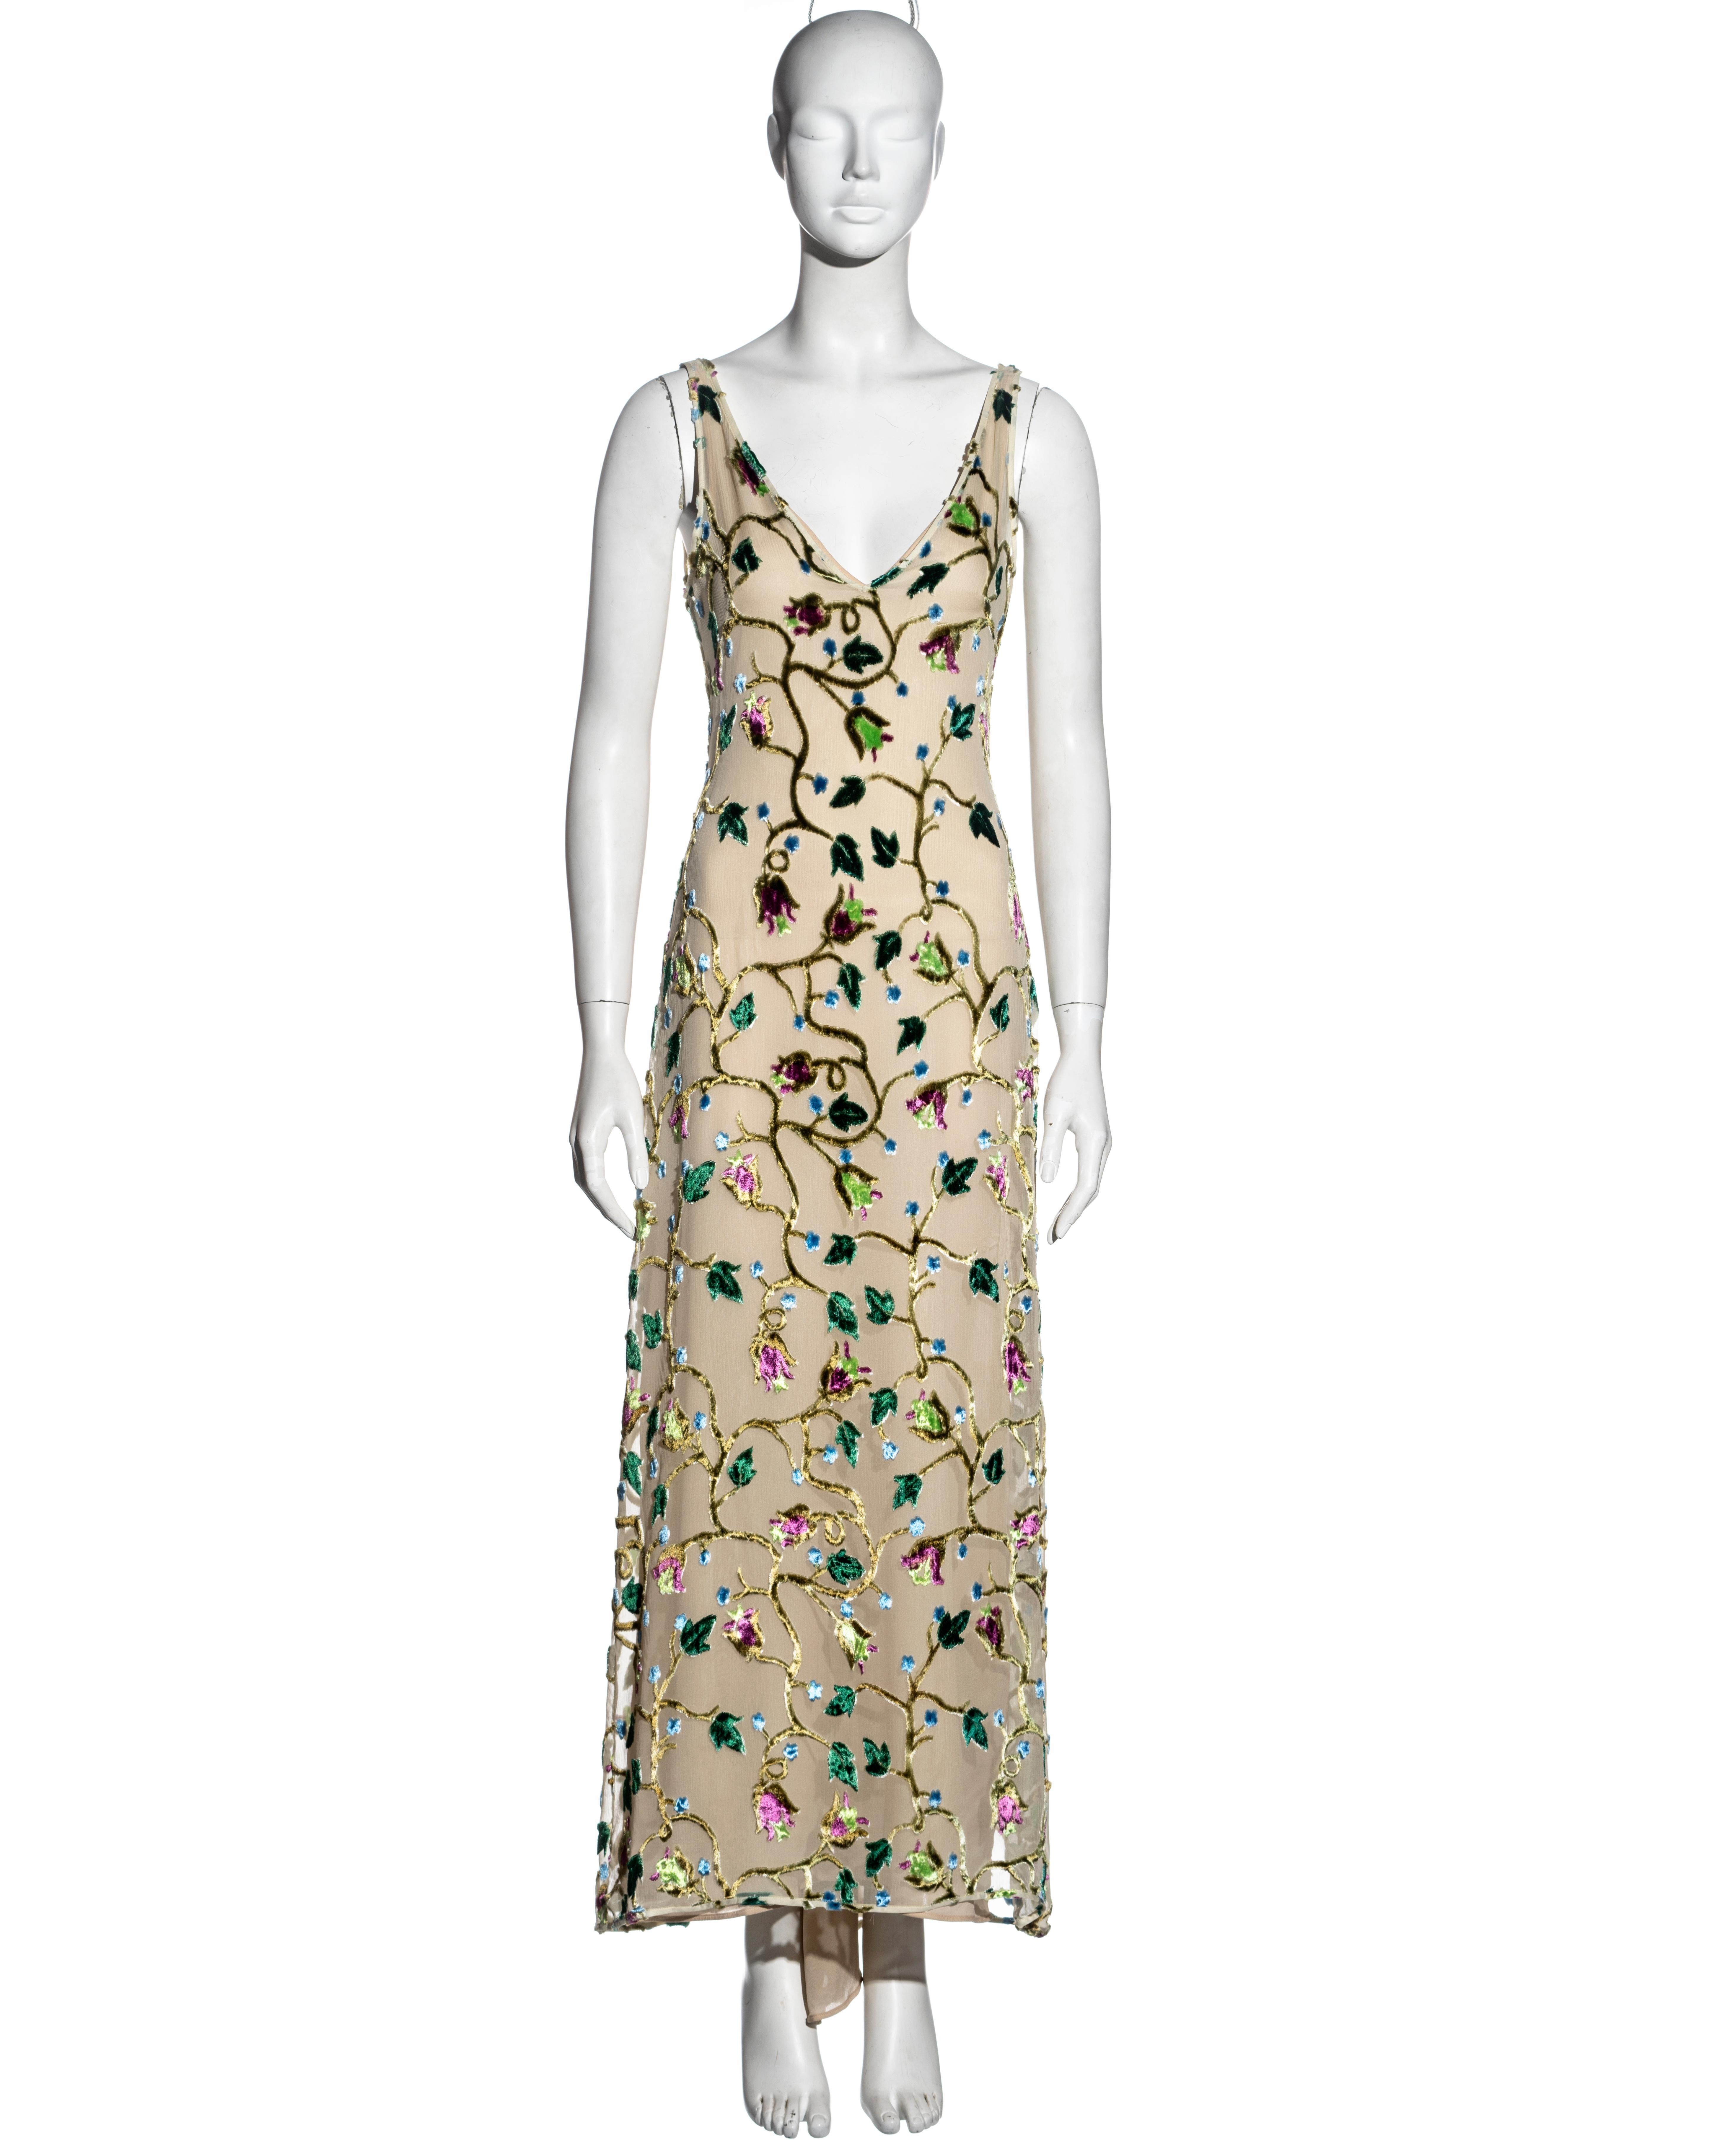 ▪ Rare Prada evening slip dress
▪ Designed by Miuccia Prada 
▪ Ivory devore chiffon with a leaf pattern in magenta, olive, green and teal 
▪ Sold with a matching Prada nude silk slip dress to wear underneath
▪ IT 42 - FR 38 - UK 10 
▪ Spring-Summer